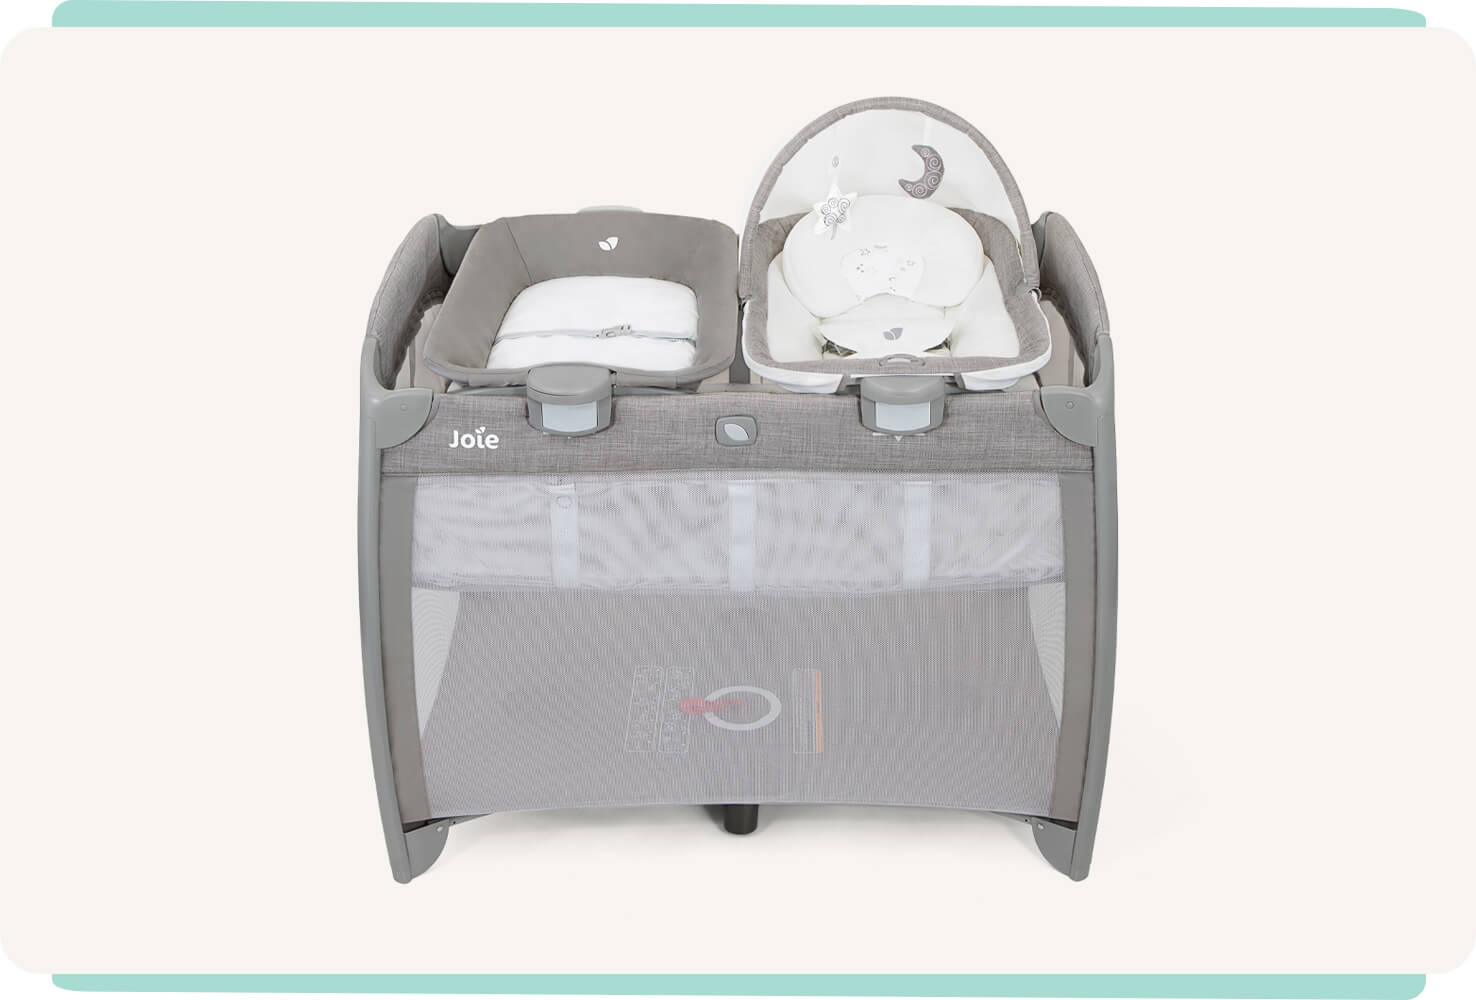  Joie excursion change and rock travel cot in gray with cartoon imagery with changer and rock removed straight on.